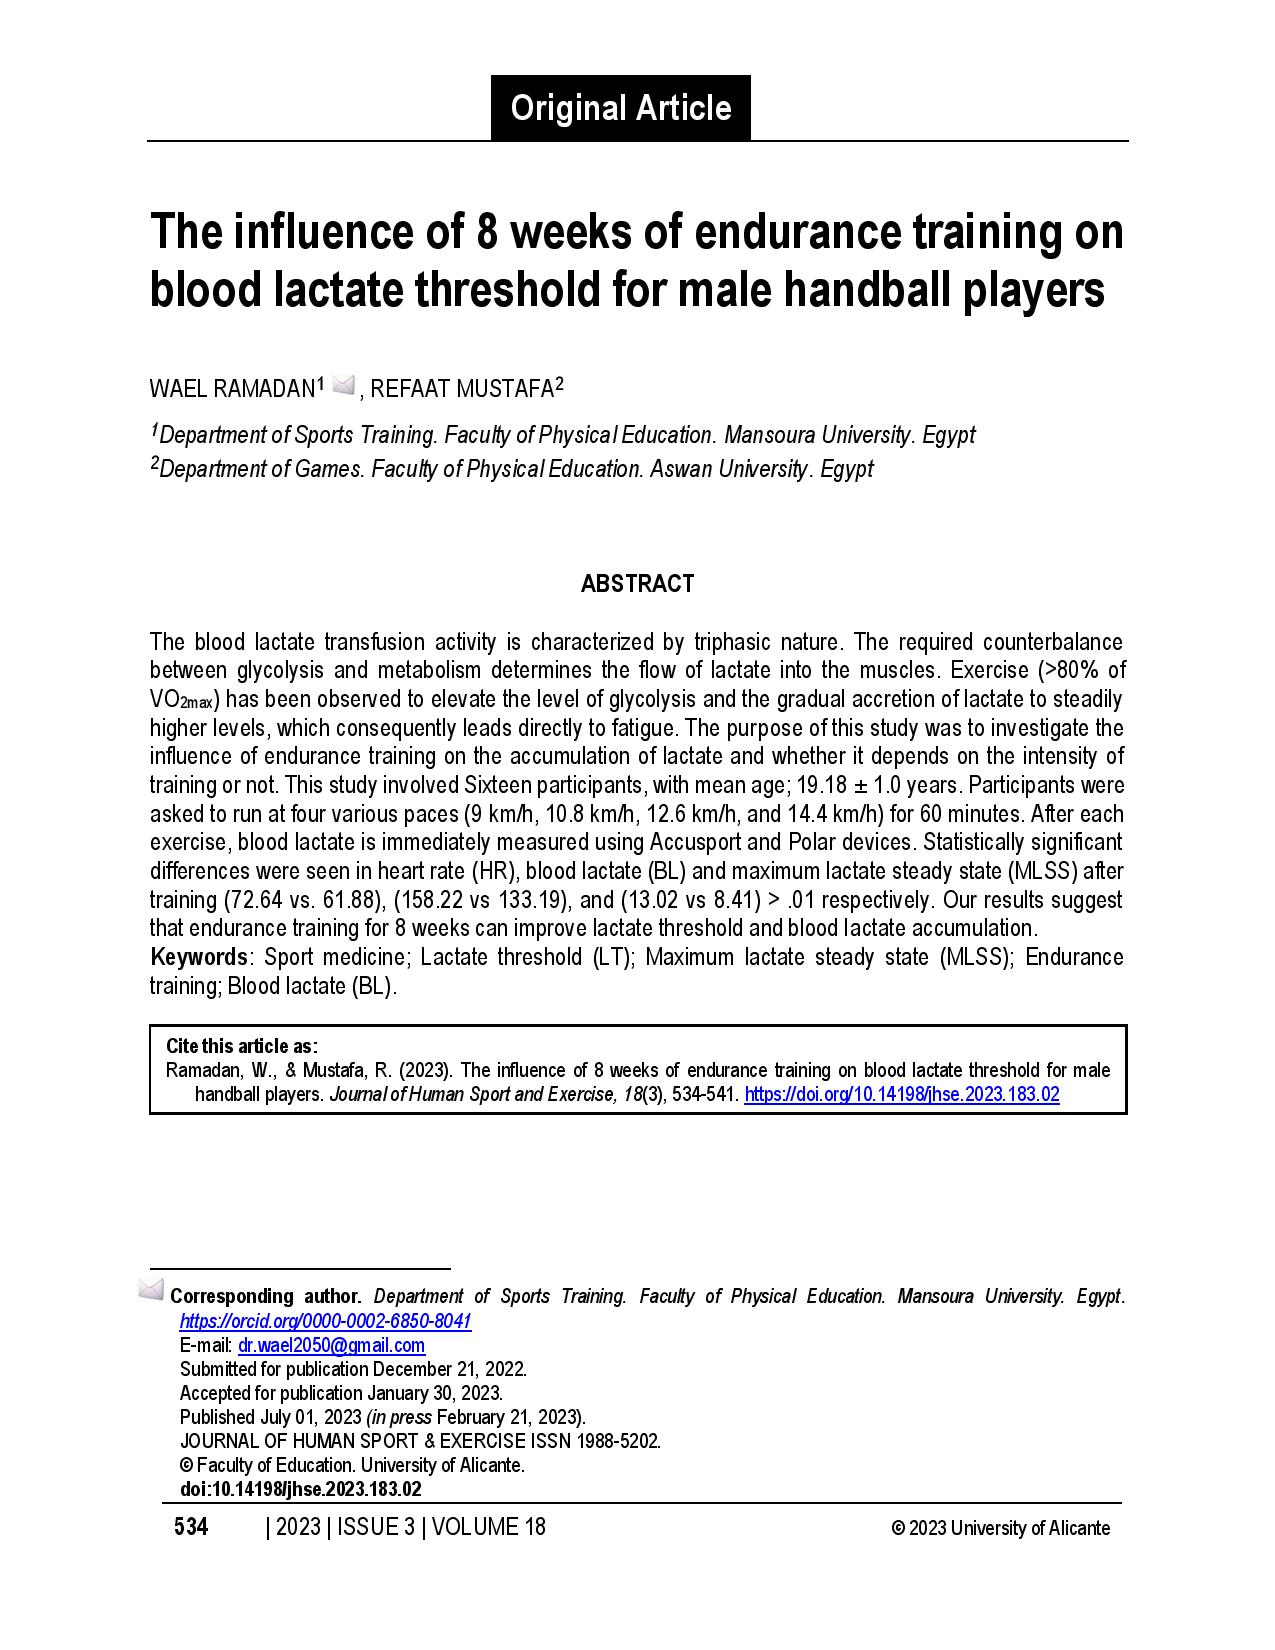 The influence of 8 weeks of endurance training on blood lactate threshold for male handball players